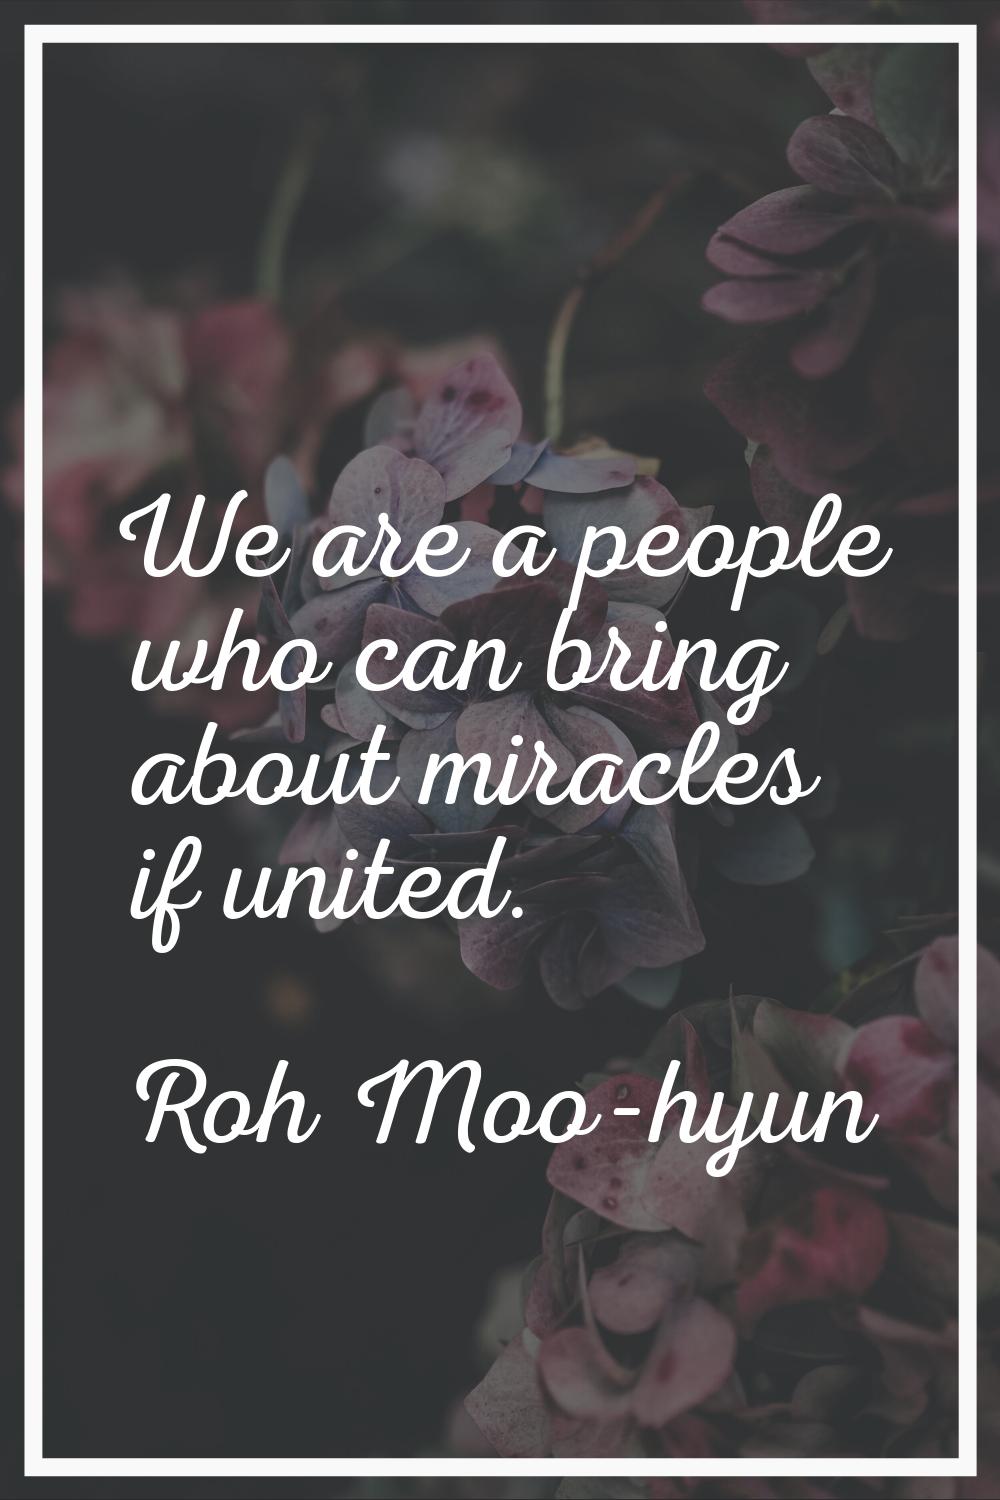 We are a people who can bring about miracles if united.